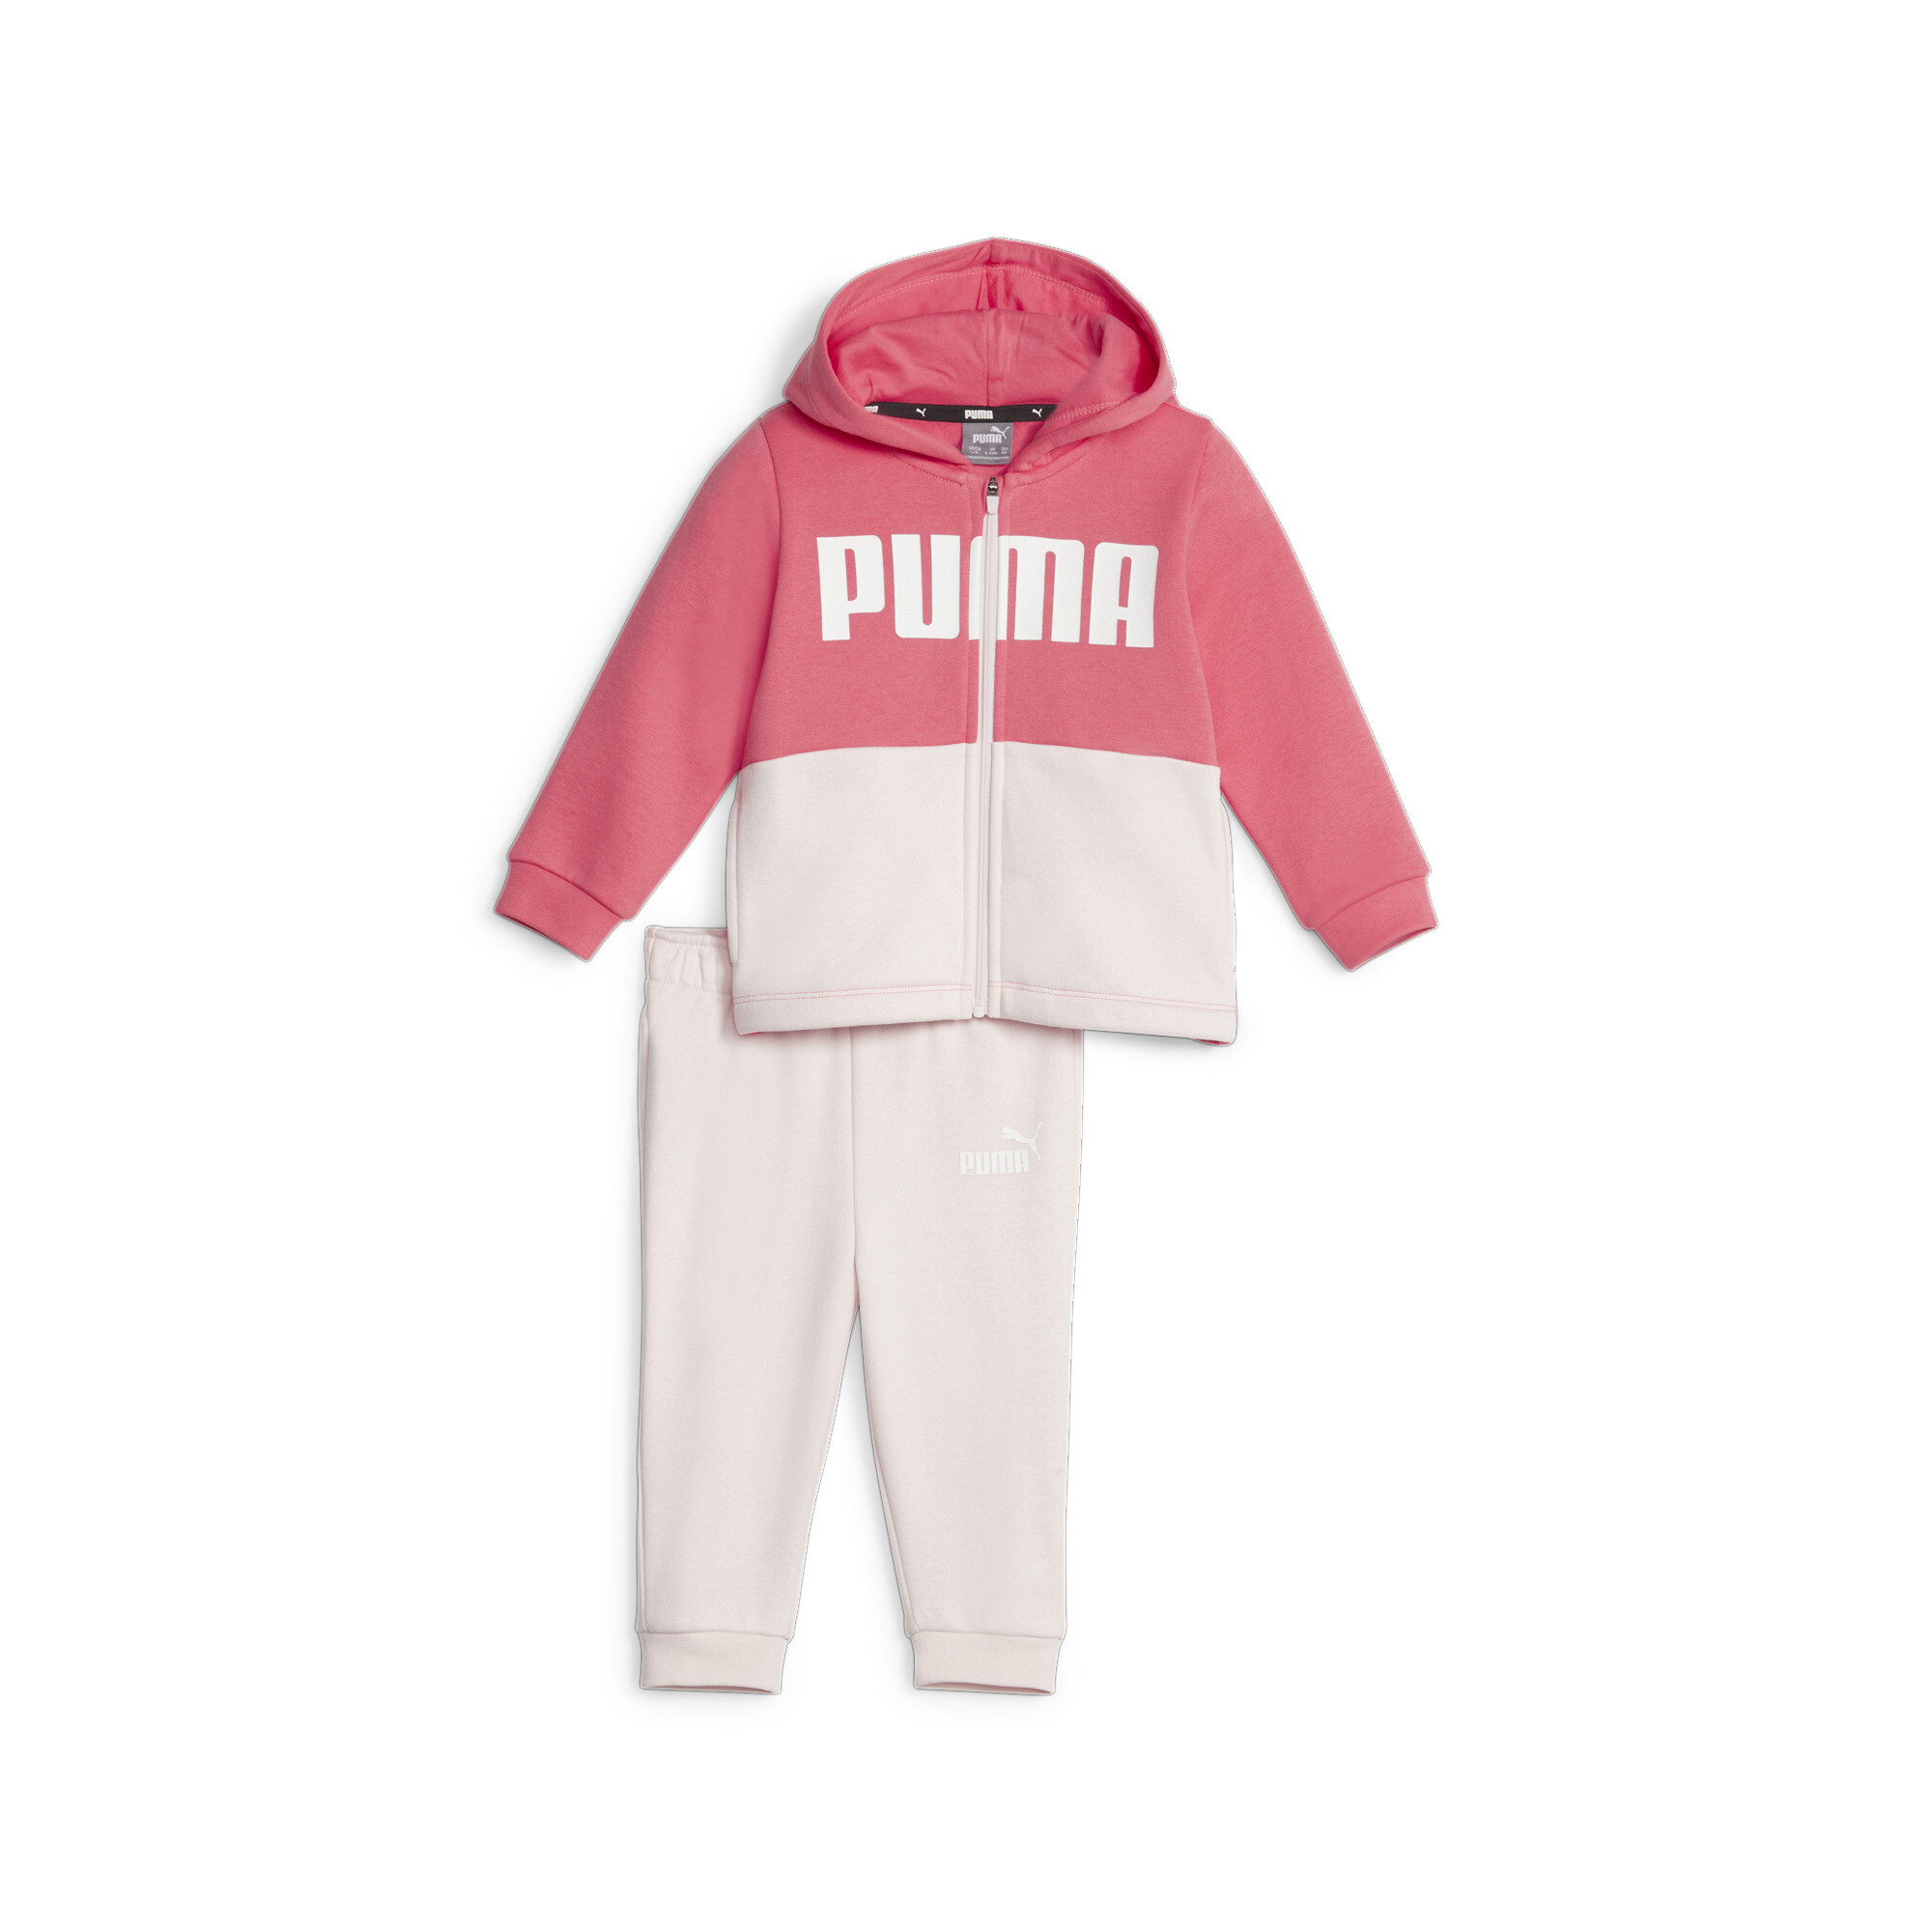 PUMA Minicats Colourblock Jogger Suit Babies In Pink, Size 1-2 Youth